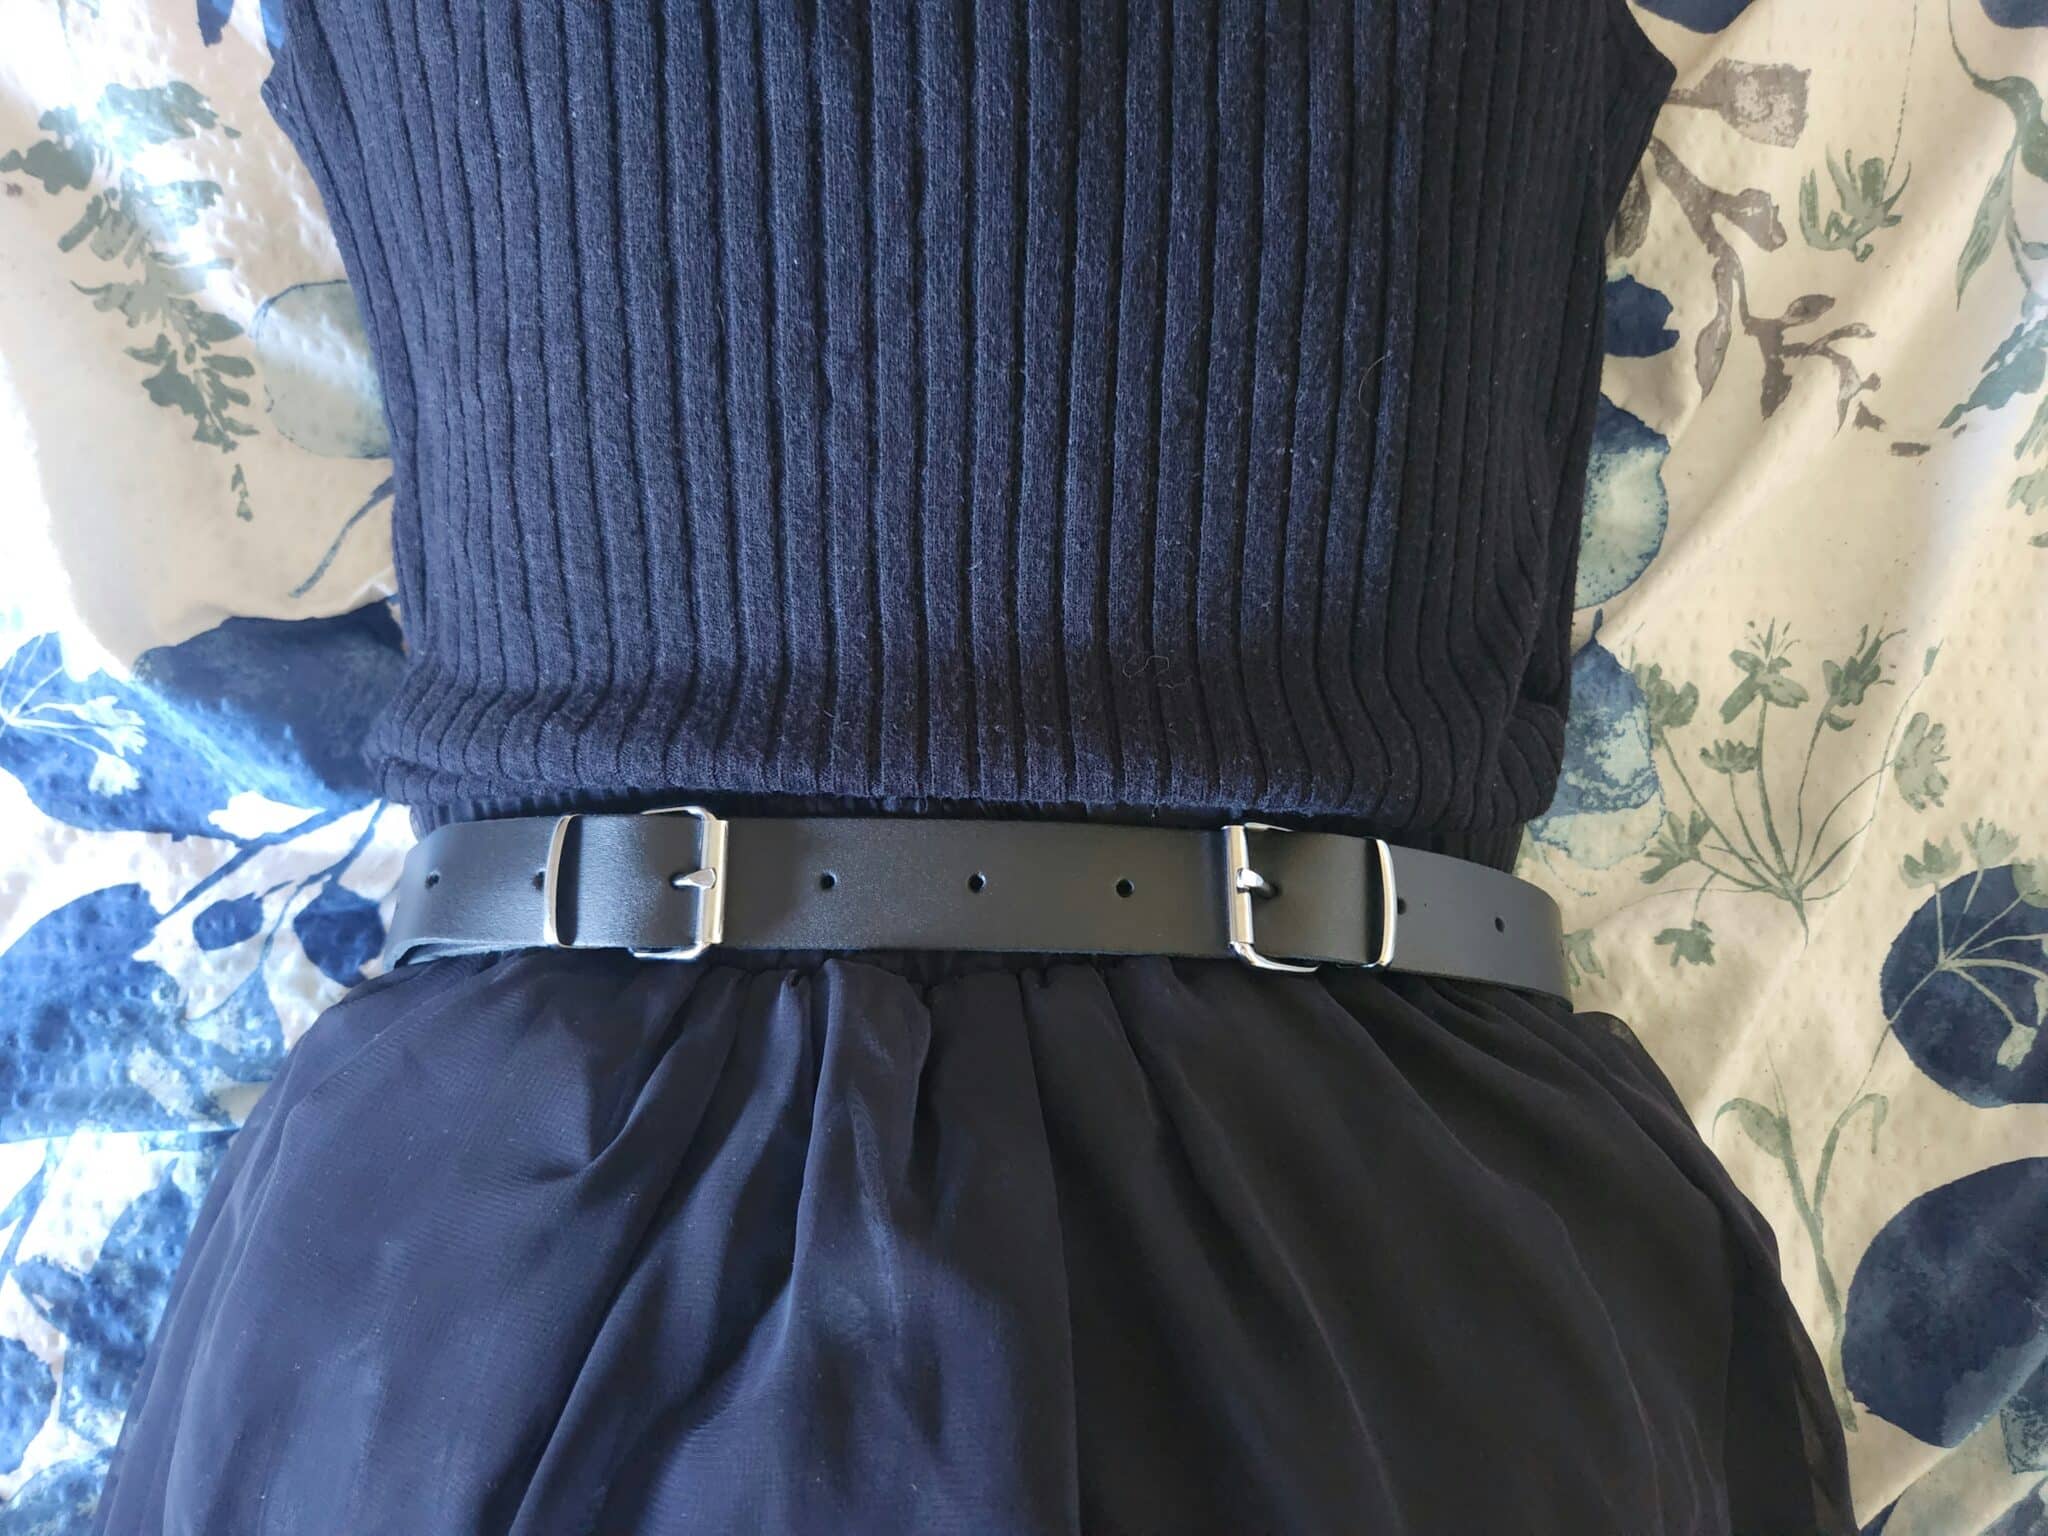 DOMINIX Deluxe Leather Leg Harness Reviewing the Material Choices and Care Guidelines